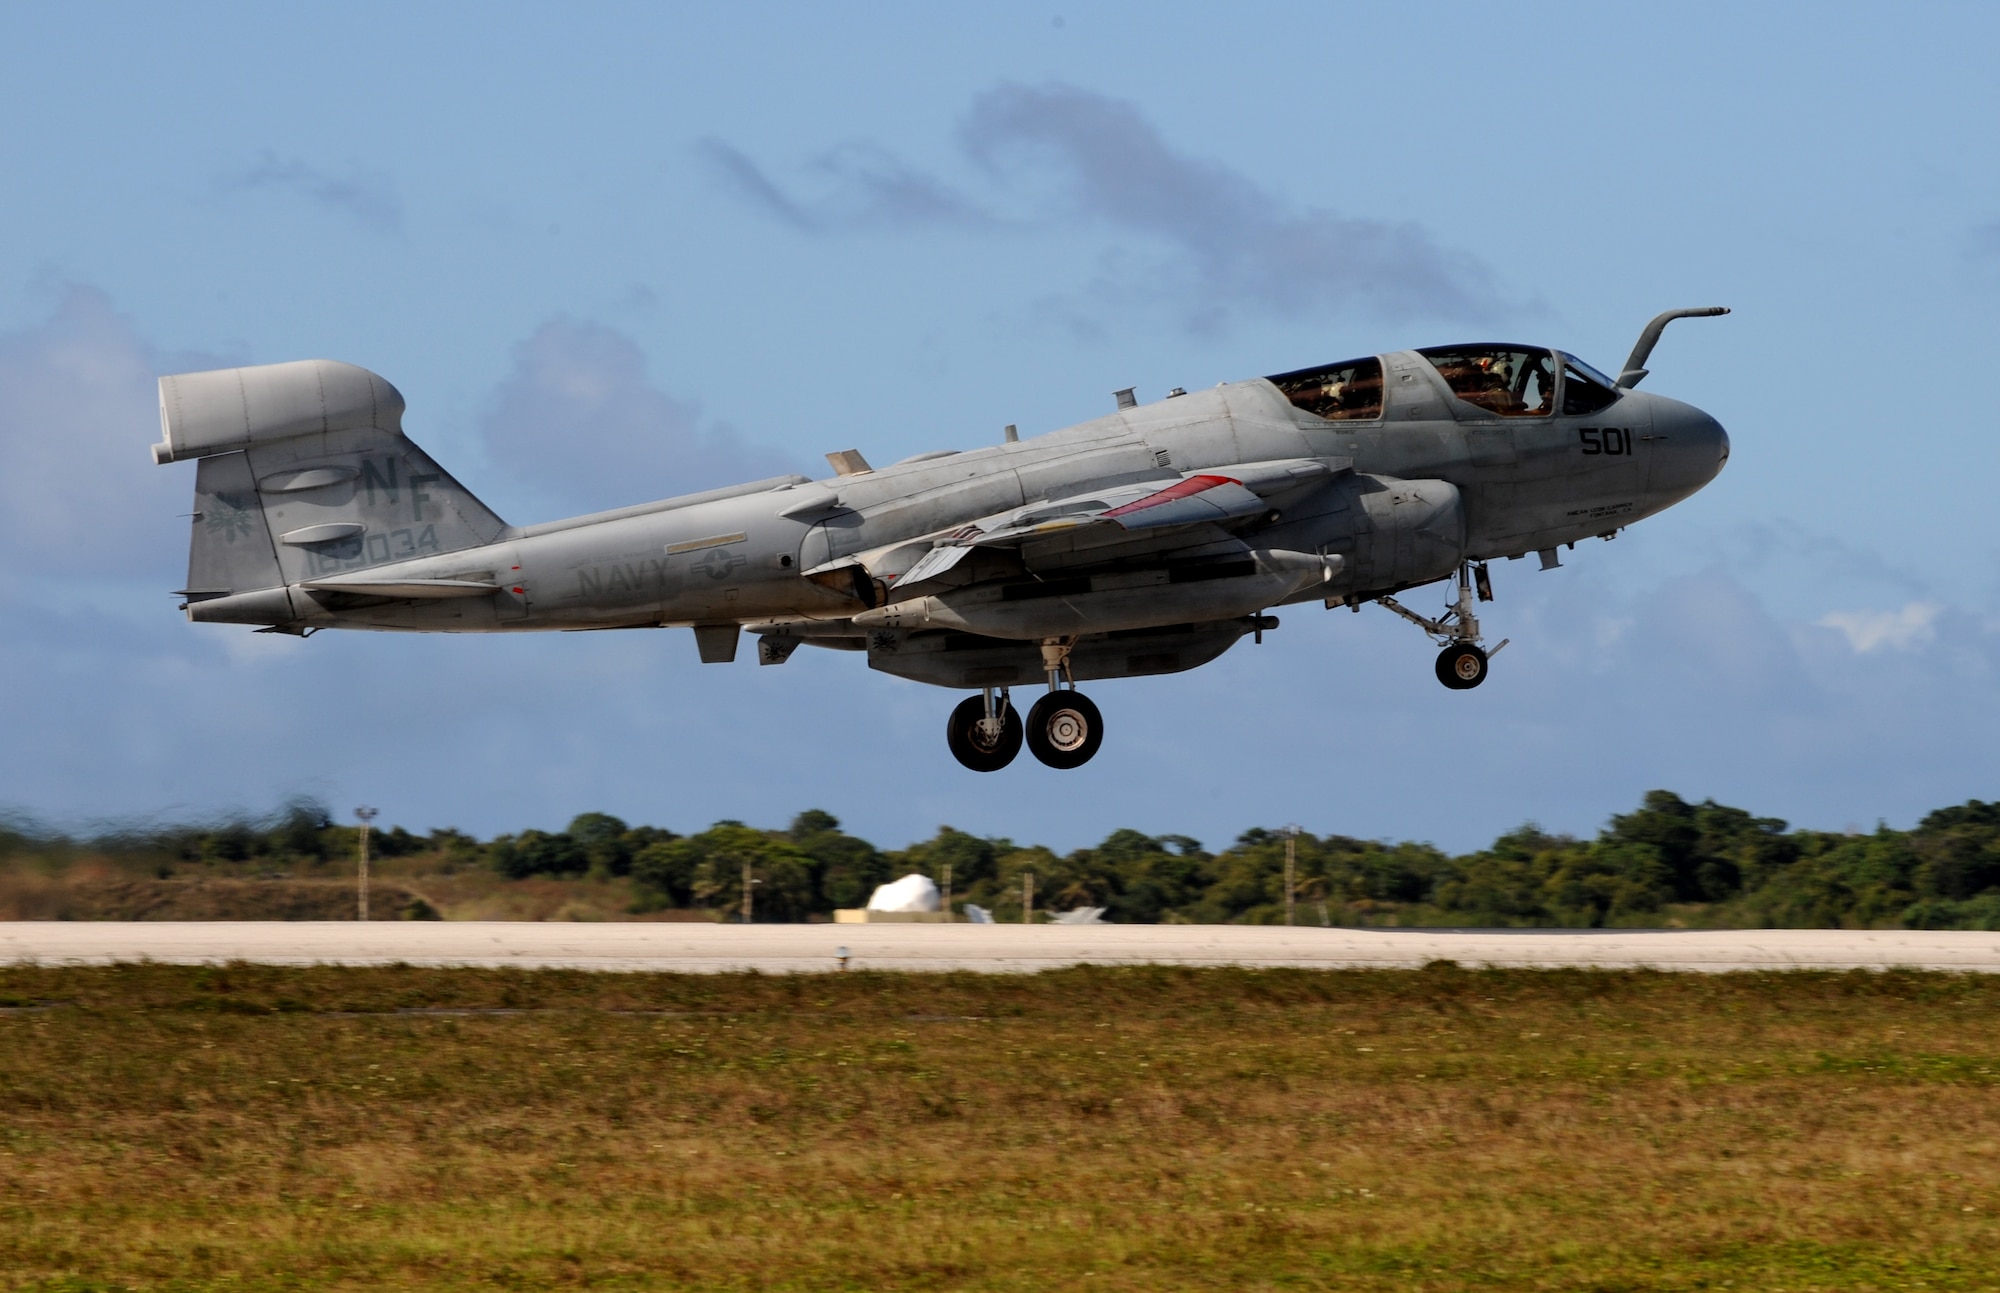 U.S. Navy EA-6B Prowler gets airborne Feb. 3 at Andersen Air Force Base, Guam prior to a local area mission during exercise Cope North 09-1. Navy EA-6B Prowlers from VAQ-136 Carrier Air Wing Five, Atsugi, Japan along with Japan Air Self Defense Force F-2s  from the 6th Squadron, Tsuiki Air Base and E-2Cs from the 601st Squadron, Misawa Air Base will join forward deployed USAF  F-16 Fighting Falcons from the 18th Aggressor Squadron, Eielson Air Force Base, Alaska, B-52 Stratofortress' currently deployed to Andersen AFB, Guam from the 23rd Expeditionary Bomb Squadron will participate in this year's Cope North exercise Feb. 2-13. The Cope North exercise is one of the longest-running series of exercises in the Pacific theater.  Since the first Cope North exercise in 1978, thousands
of American and Japanese personnel have honed skills that are vital to
maintaining a high level of readiness. This will be the tenth time the United States and Japan have held a Cope North exercise on Guam, and it will be the fourth time that the JASDF will use live ordnance.
 
(U.S. Air Force photo/ Master Sgt. Kevin J. Gruenwald) released





















  












 











































  












 

























